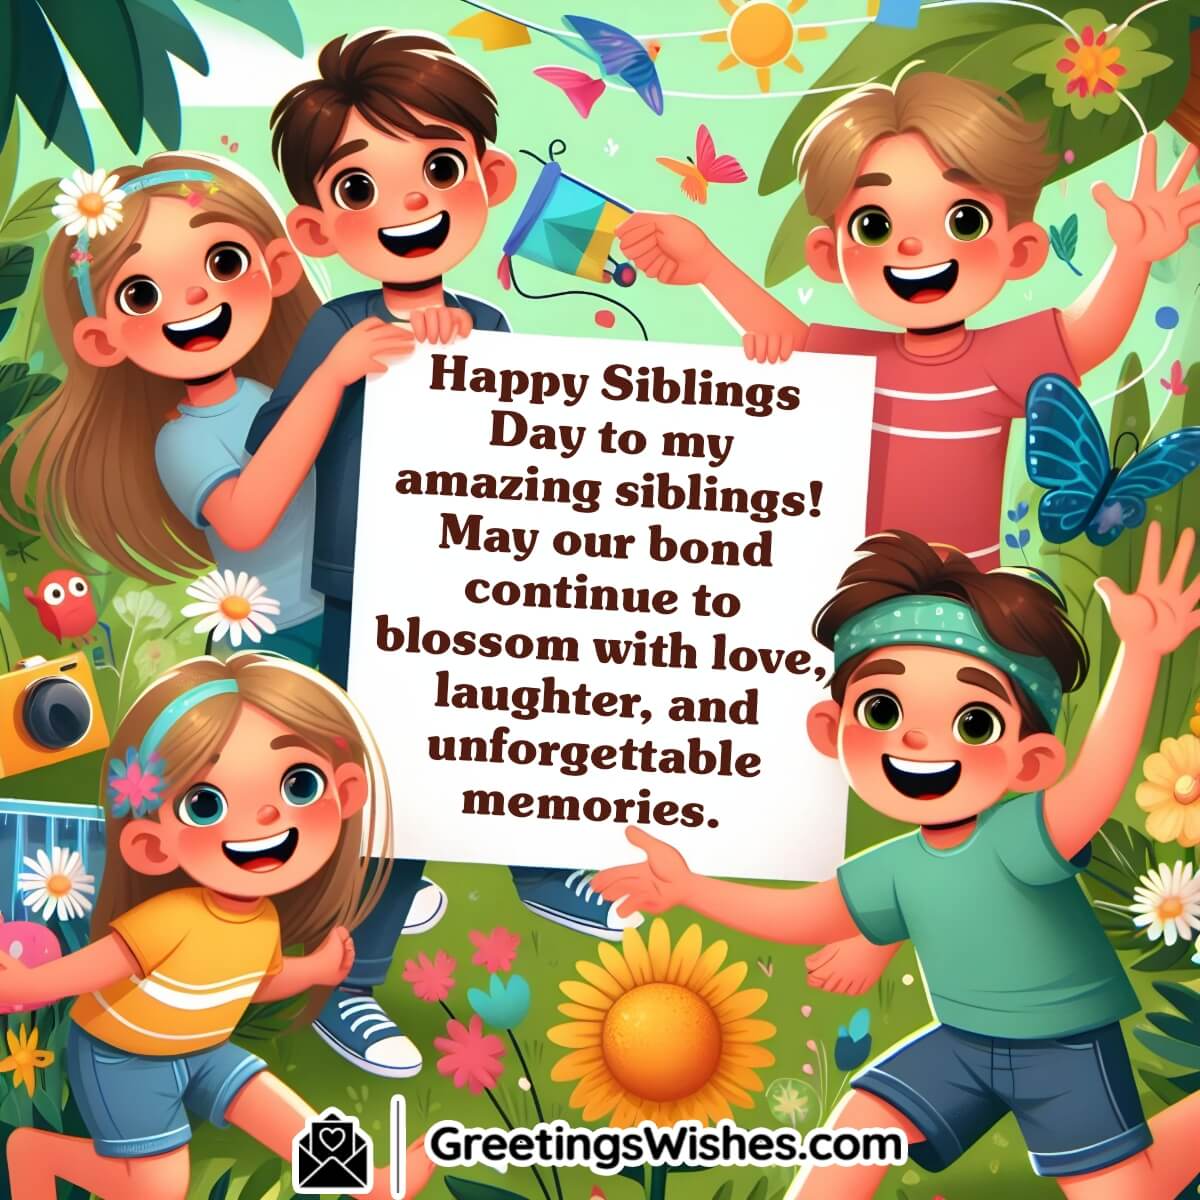 Happy Siblings Day Wishes